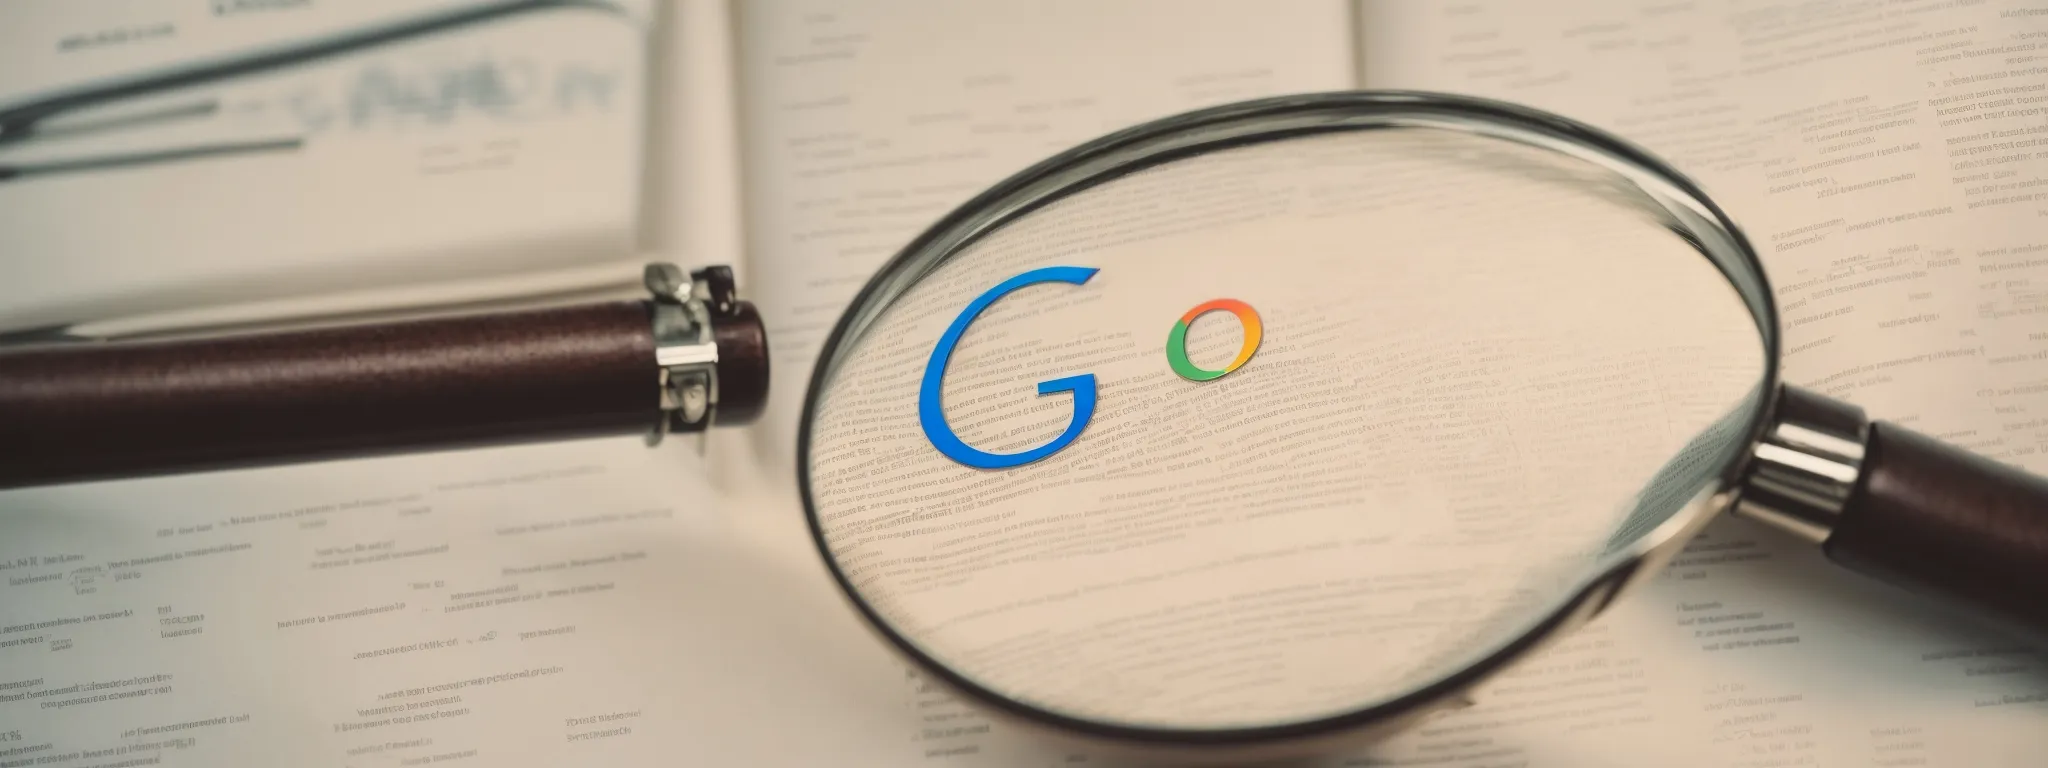 a magnifying glass hovering over a simplified illustration of web pages linked by a network, with a subtle, opaque google logo in the background.